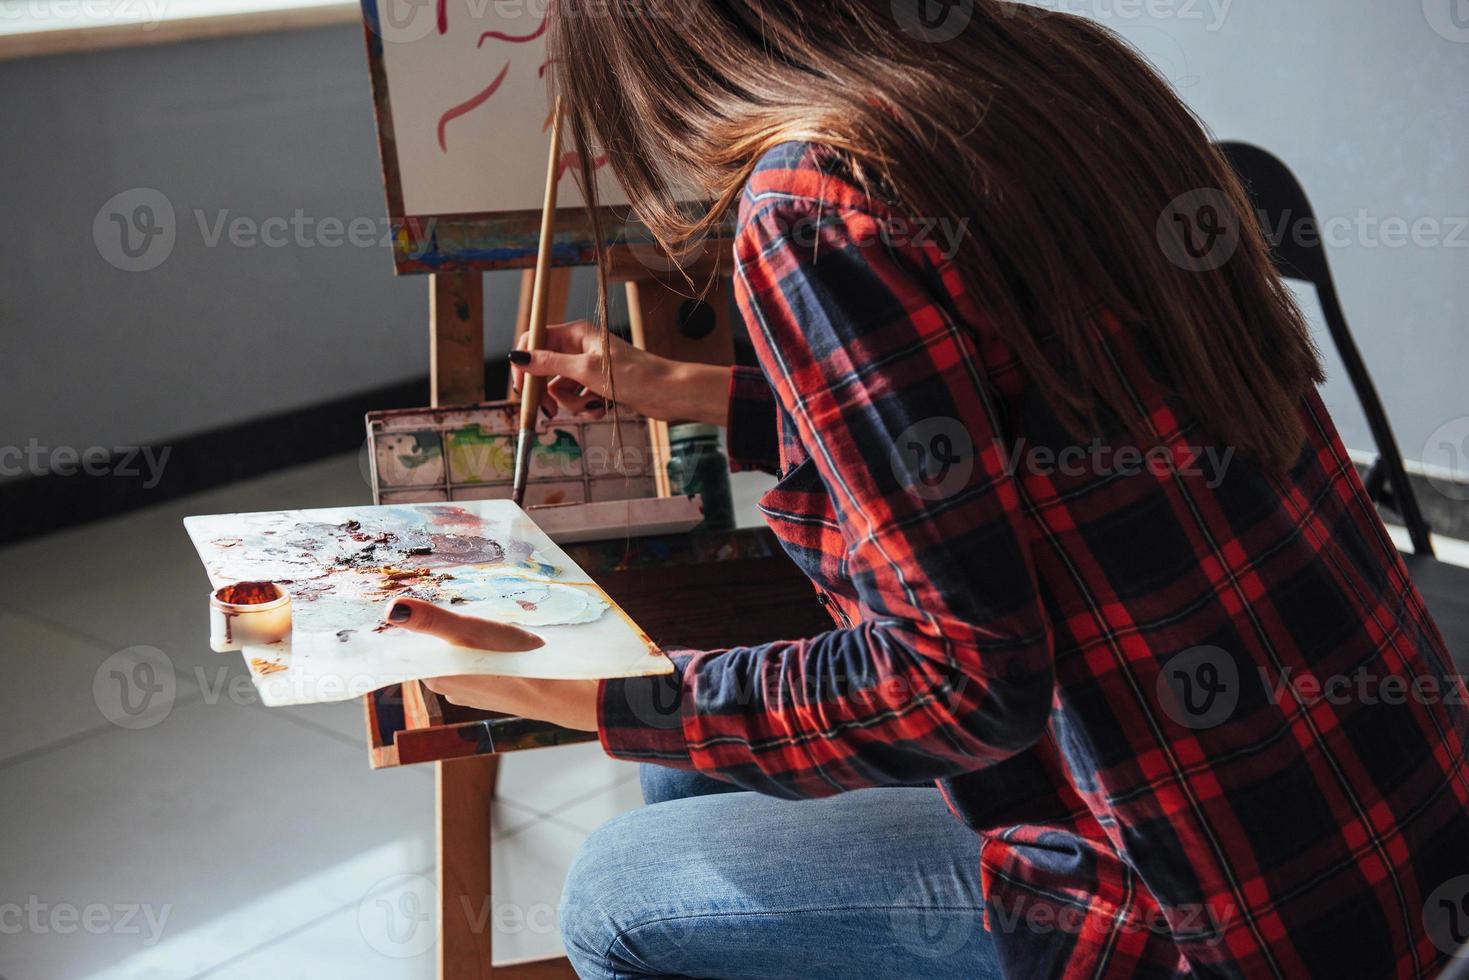 Pretty Pretty Girl artist paints on canvas painting on the easel. photo